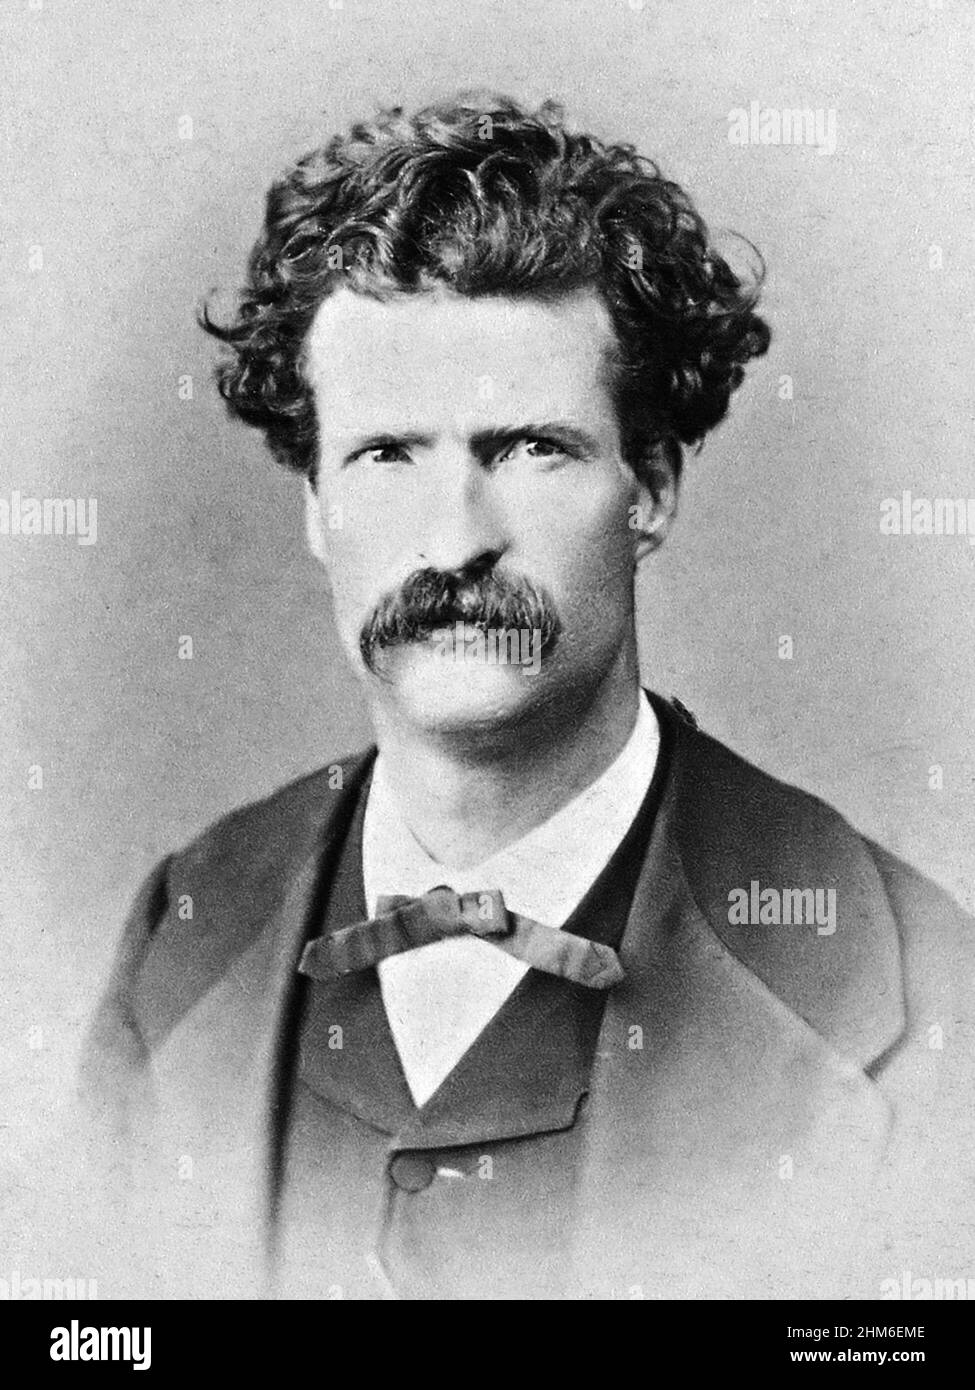 The american writer Mark Twain (real name Samuel Clemens), author of Tom Sawyer and Huckleberry Finn. Photo from 1867 when the author was 32. Stock Photo